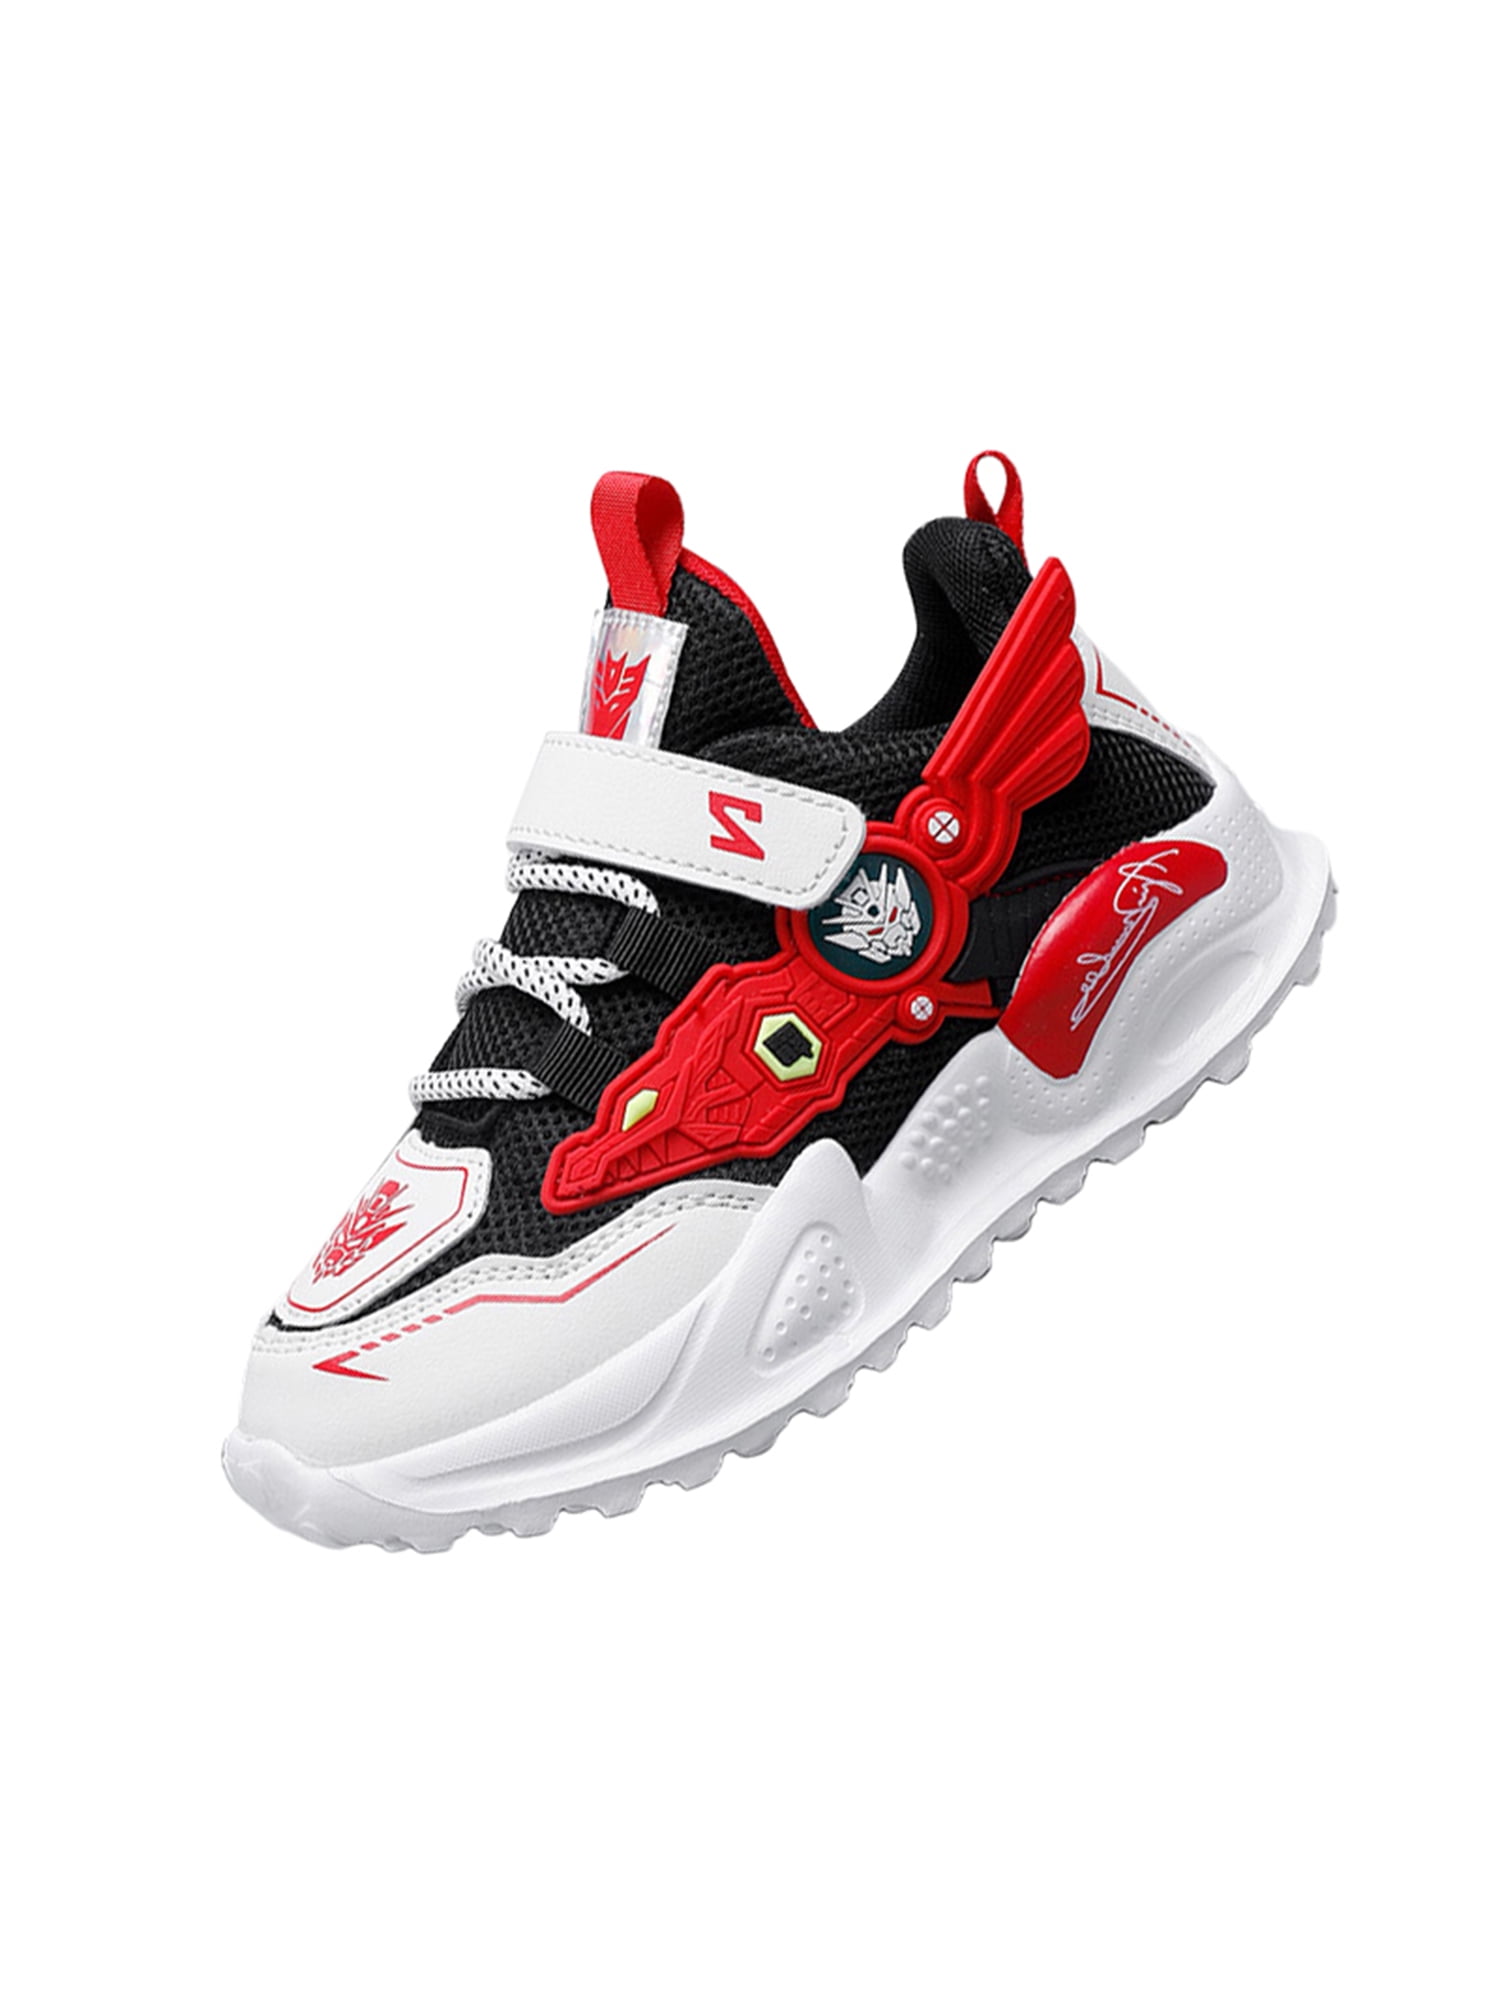 Kids Sneakers Breathable Sneakers Athletic Walking Outdoor Running Shoes for Boy 